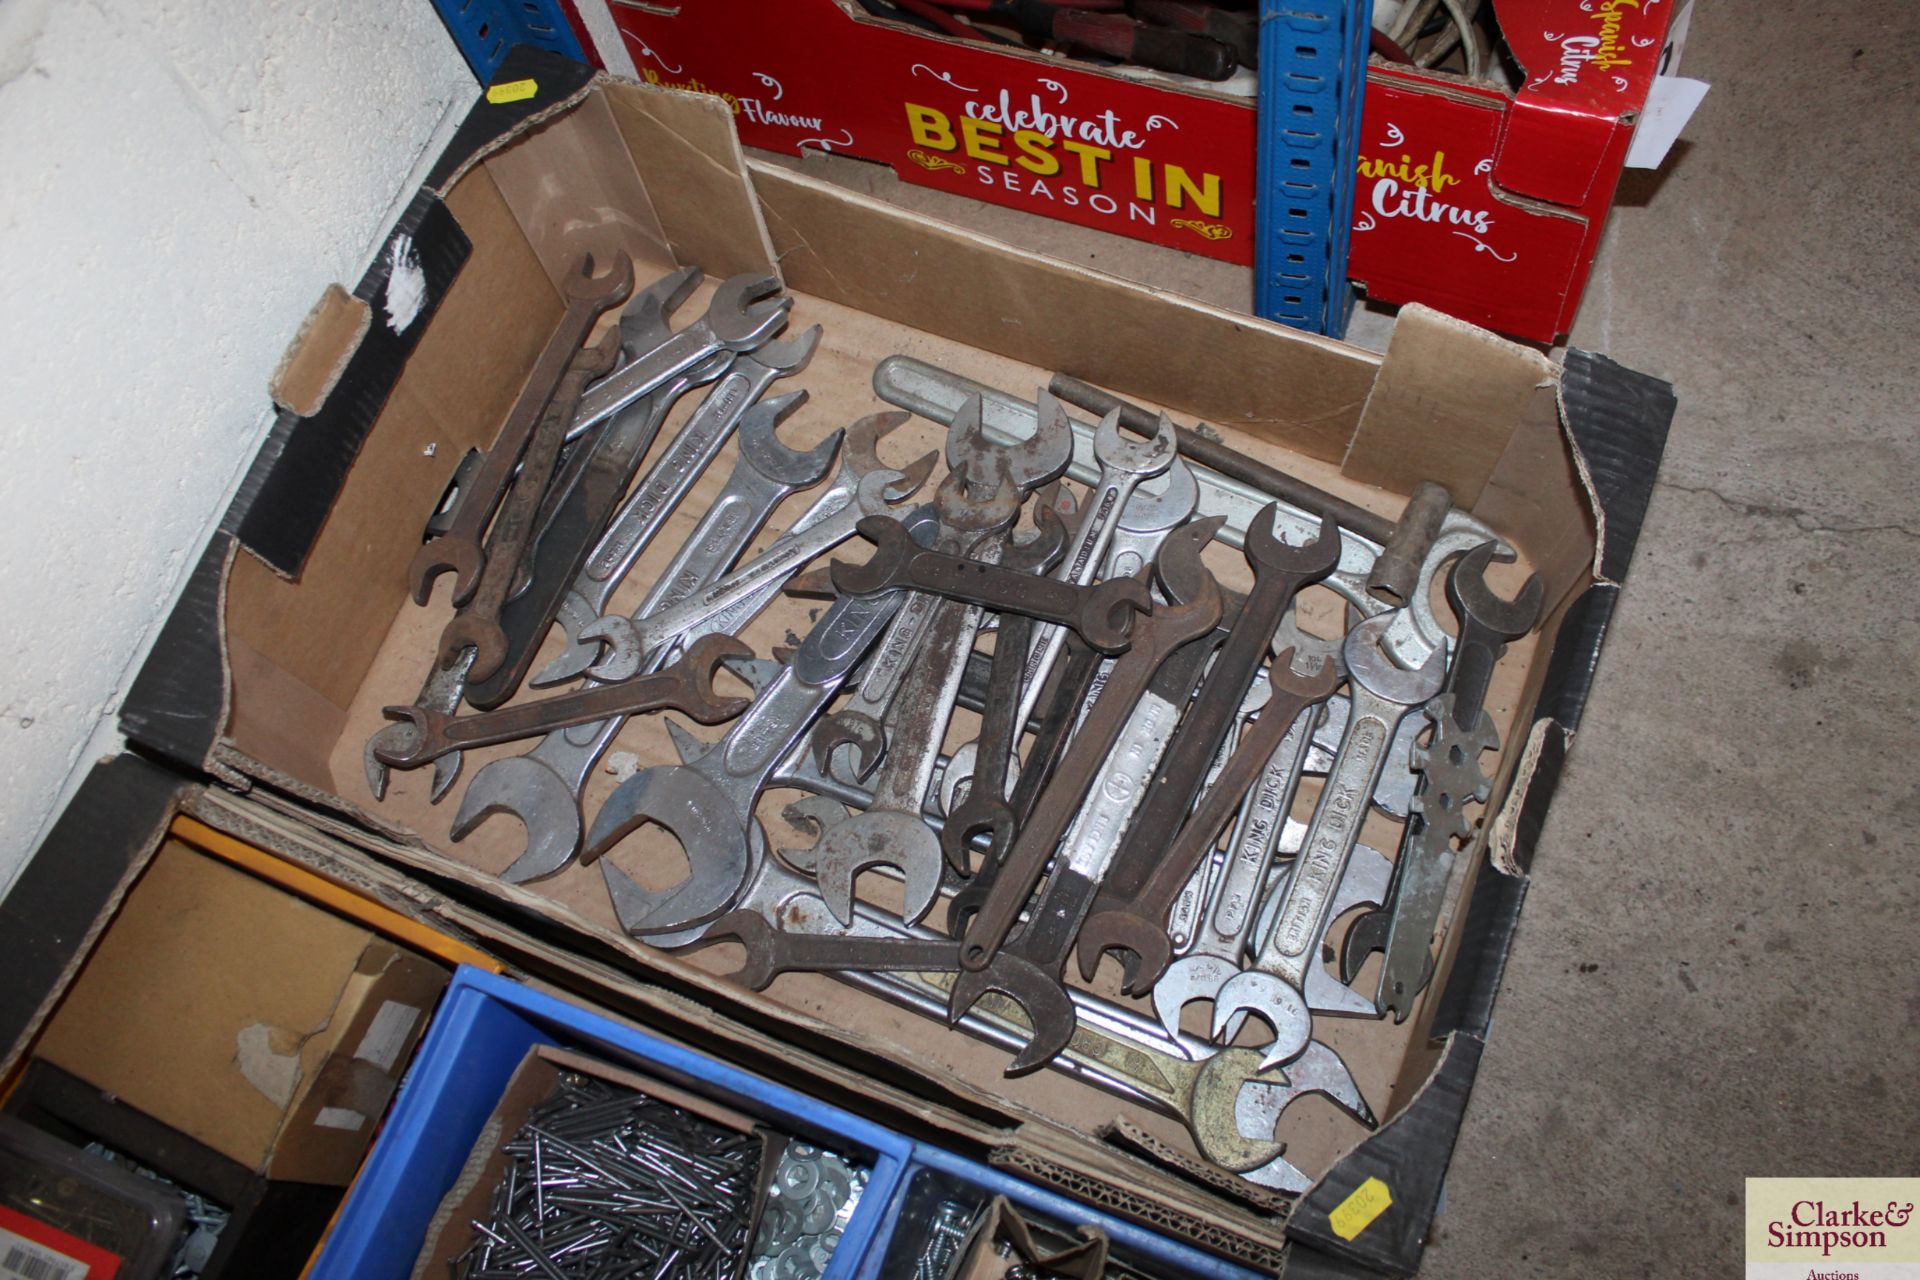 Quantity of AF c-spanners.